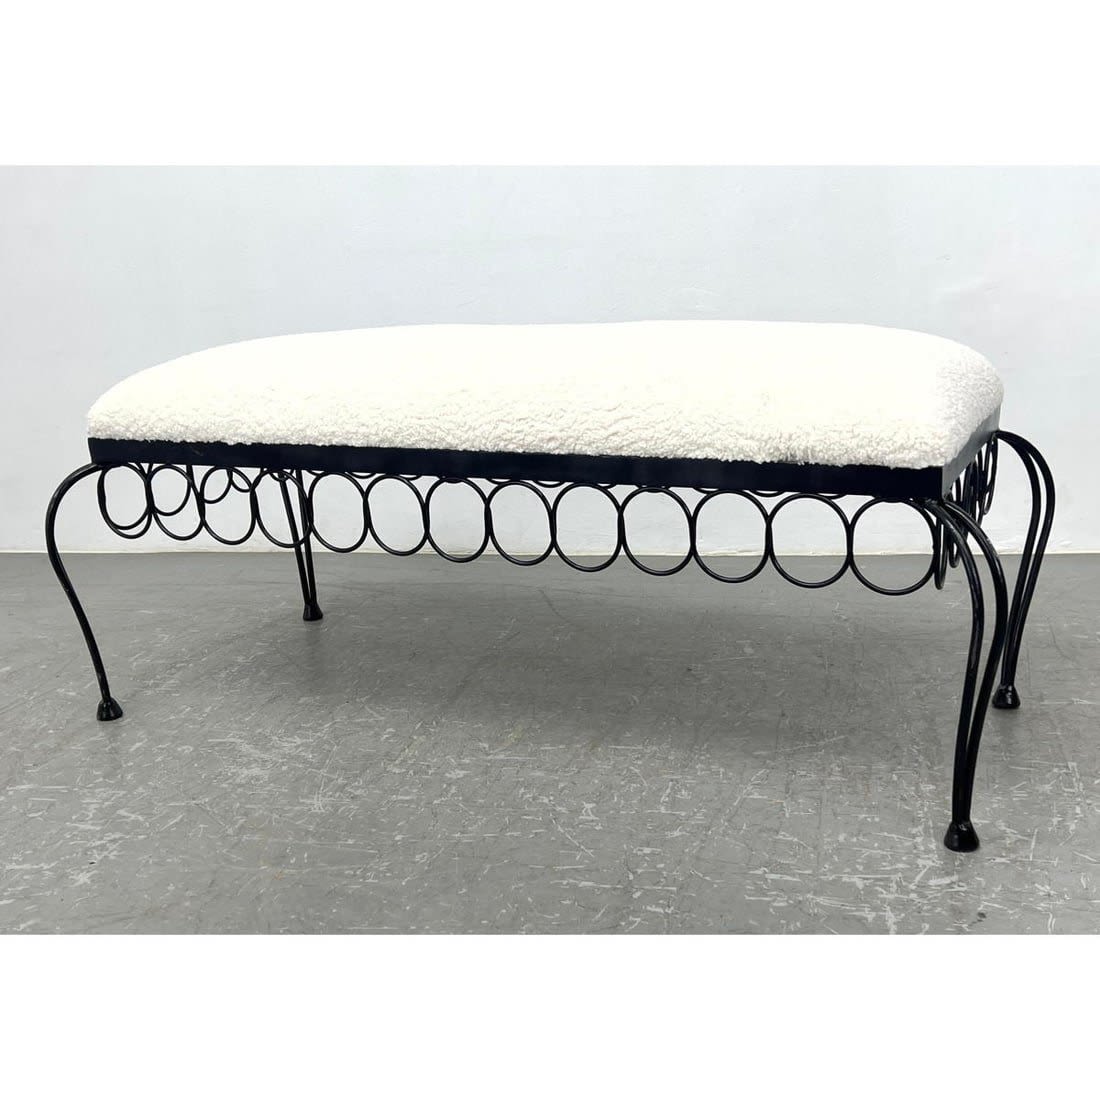 Contemporary iron bench with concentric 3cf20c